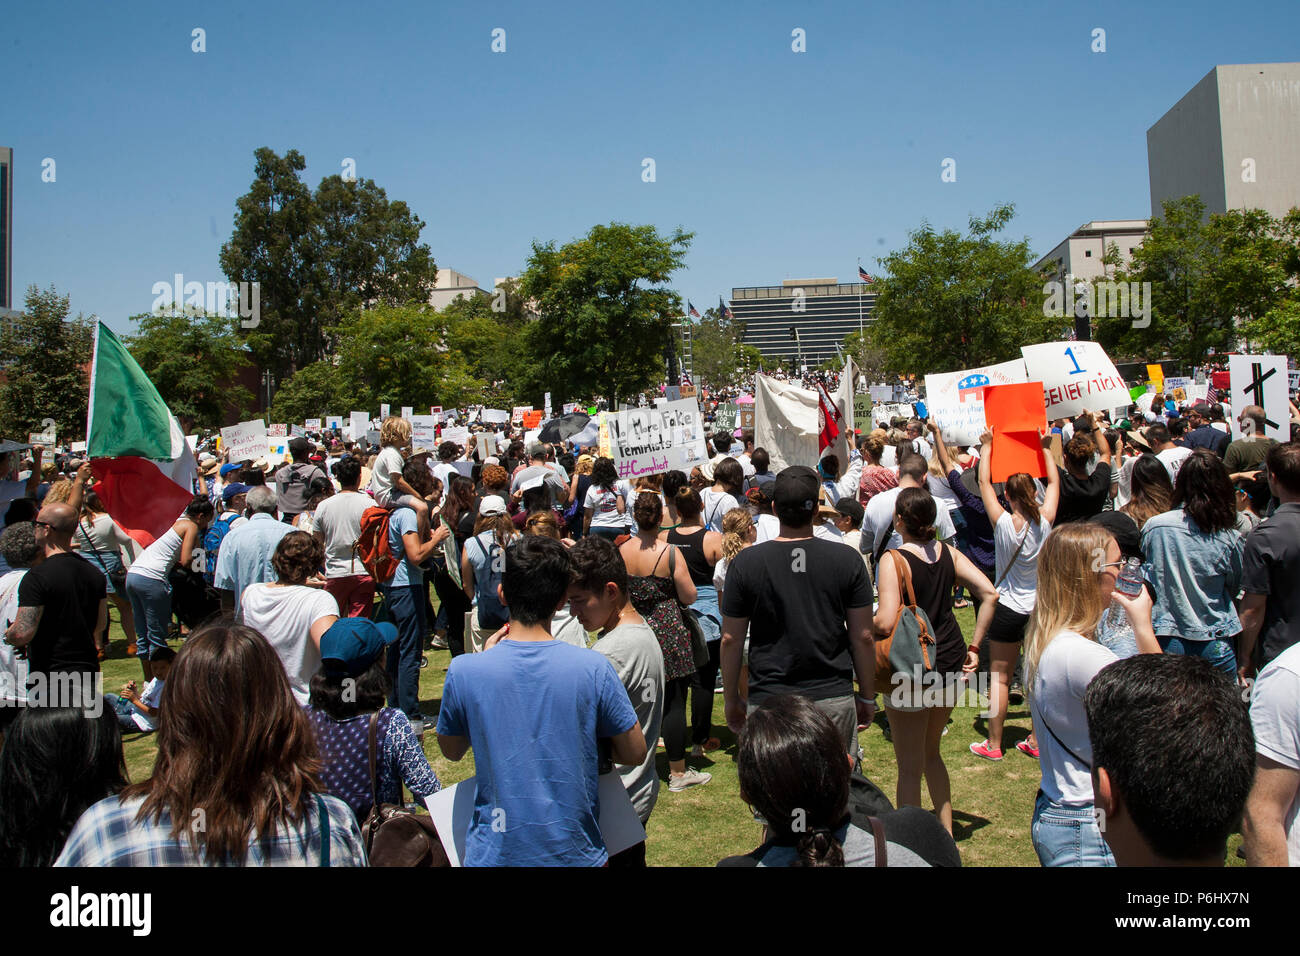 Protestors at the Families Together March and Rally in Downtown LA protesting the Trump administration policy of separating immigrant families. Stock Photo